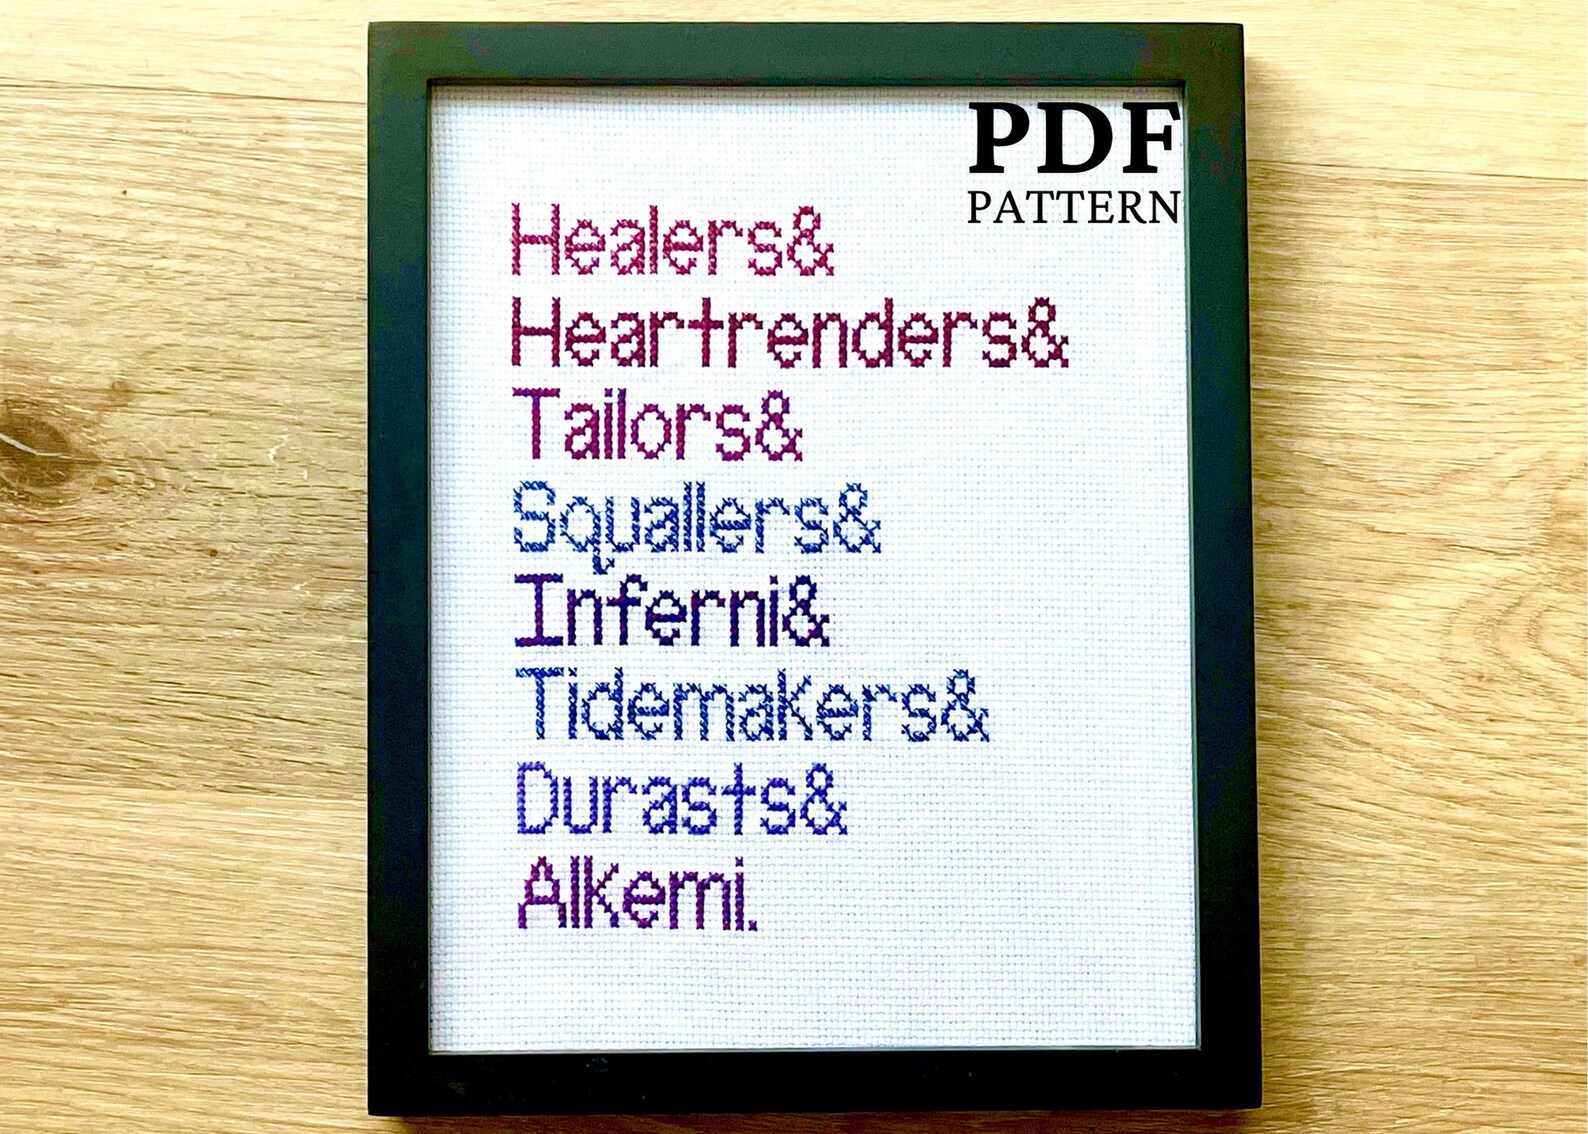 A cross stitch listing the orders of the Grill: Healer, Heartened, Tailor, Squaller, Inferno, Tidemakers, Durasts, and Alkemi.